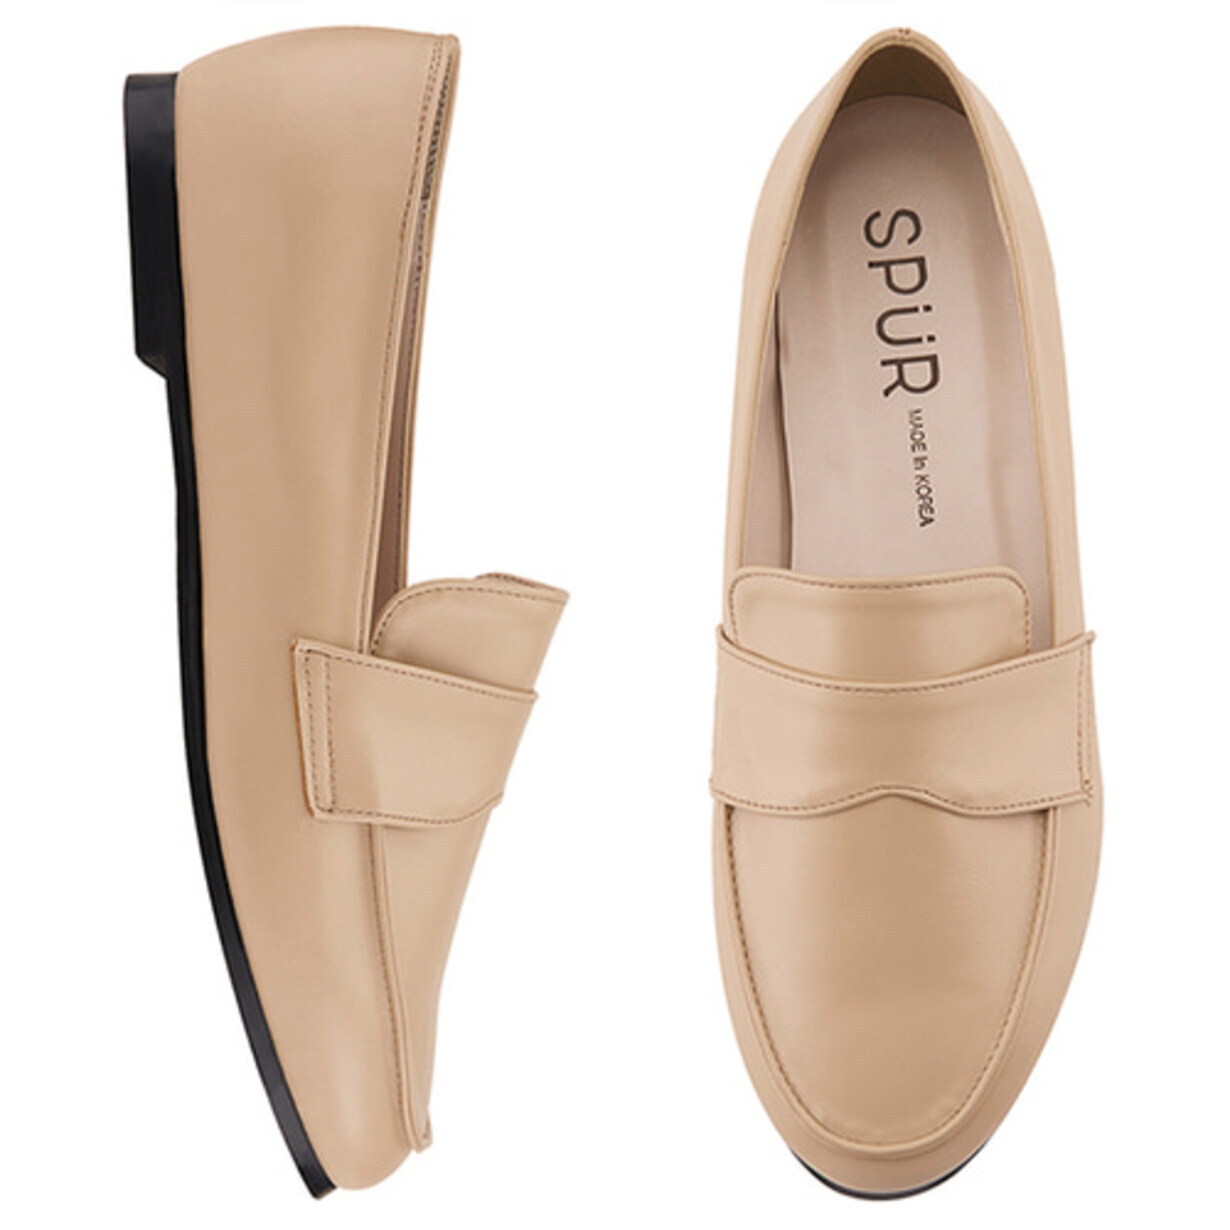 SPUR[스퍼]MS9005 Charming daily Loafer 베이지